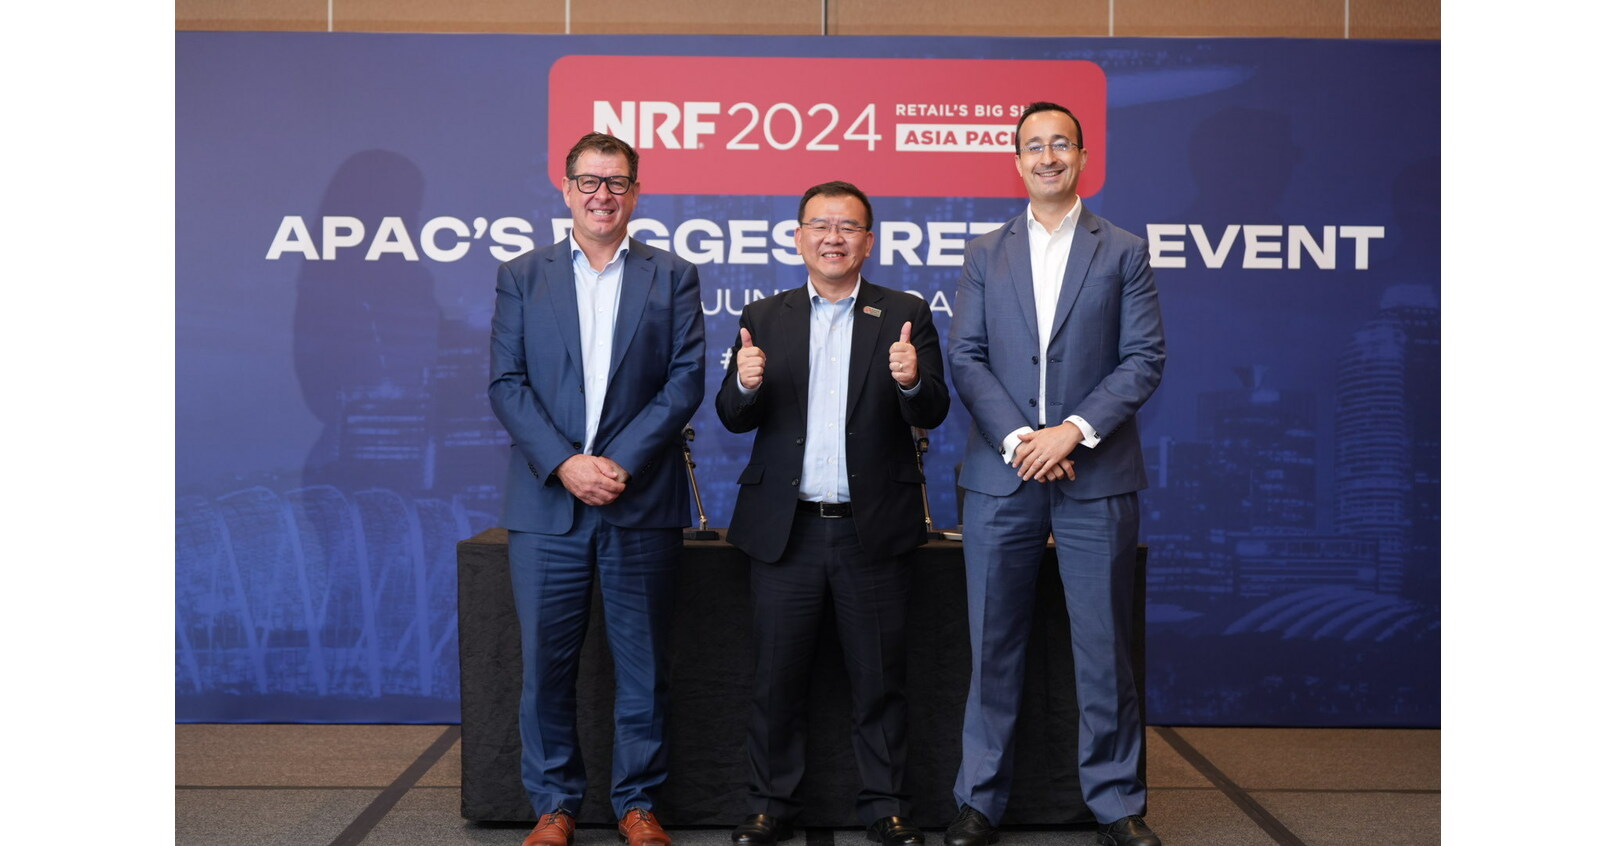 Singapore Adds NRF 2024: Retail’s Big Show Asia Pacific to its Flagship Event List APAC – English – PR Newswire